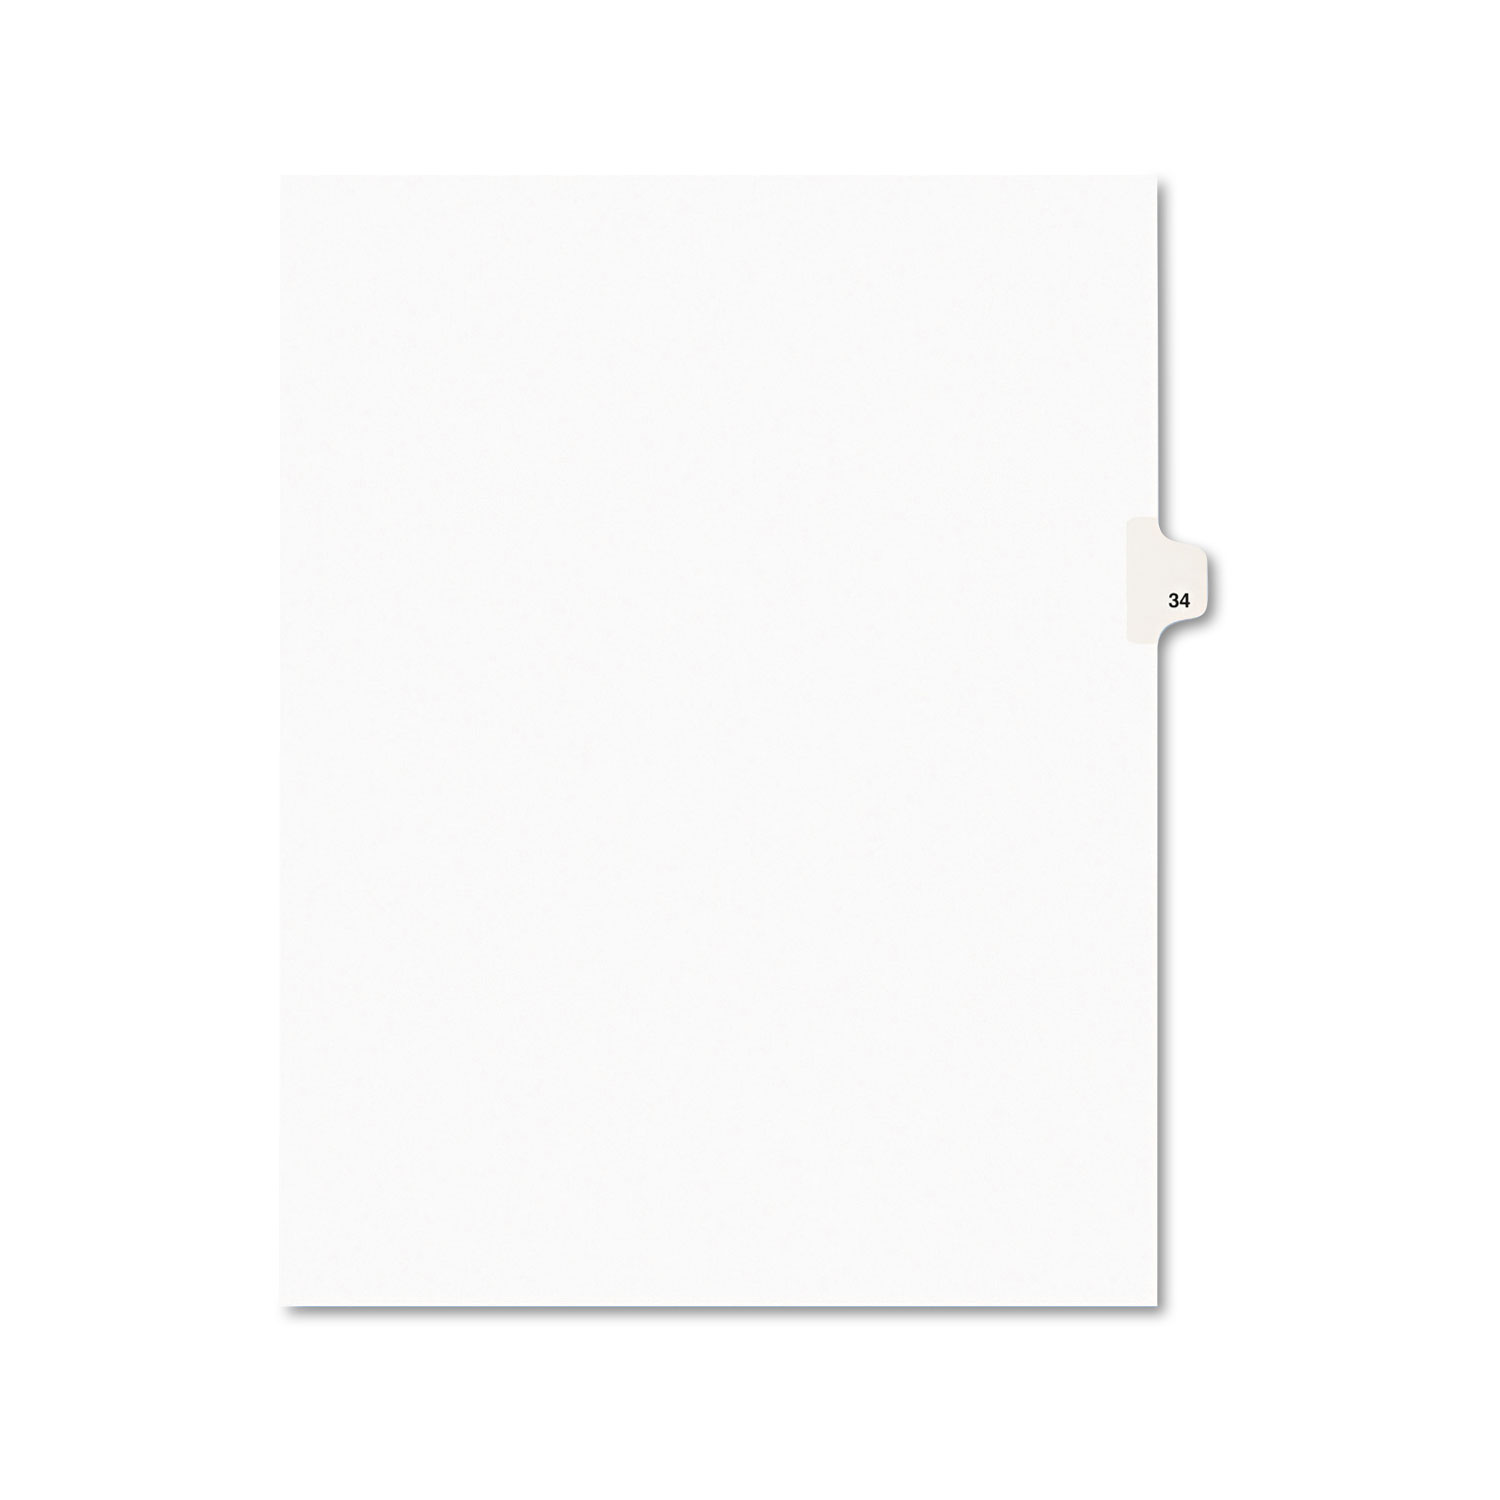  Avery 01034 Preprinted Legal Exhibit Side Tab Index Dividers, Avery Style, 10-Tab, 34, 11 x 8.5, White, 25/Pack (AVE01034) 